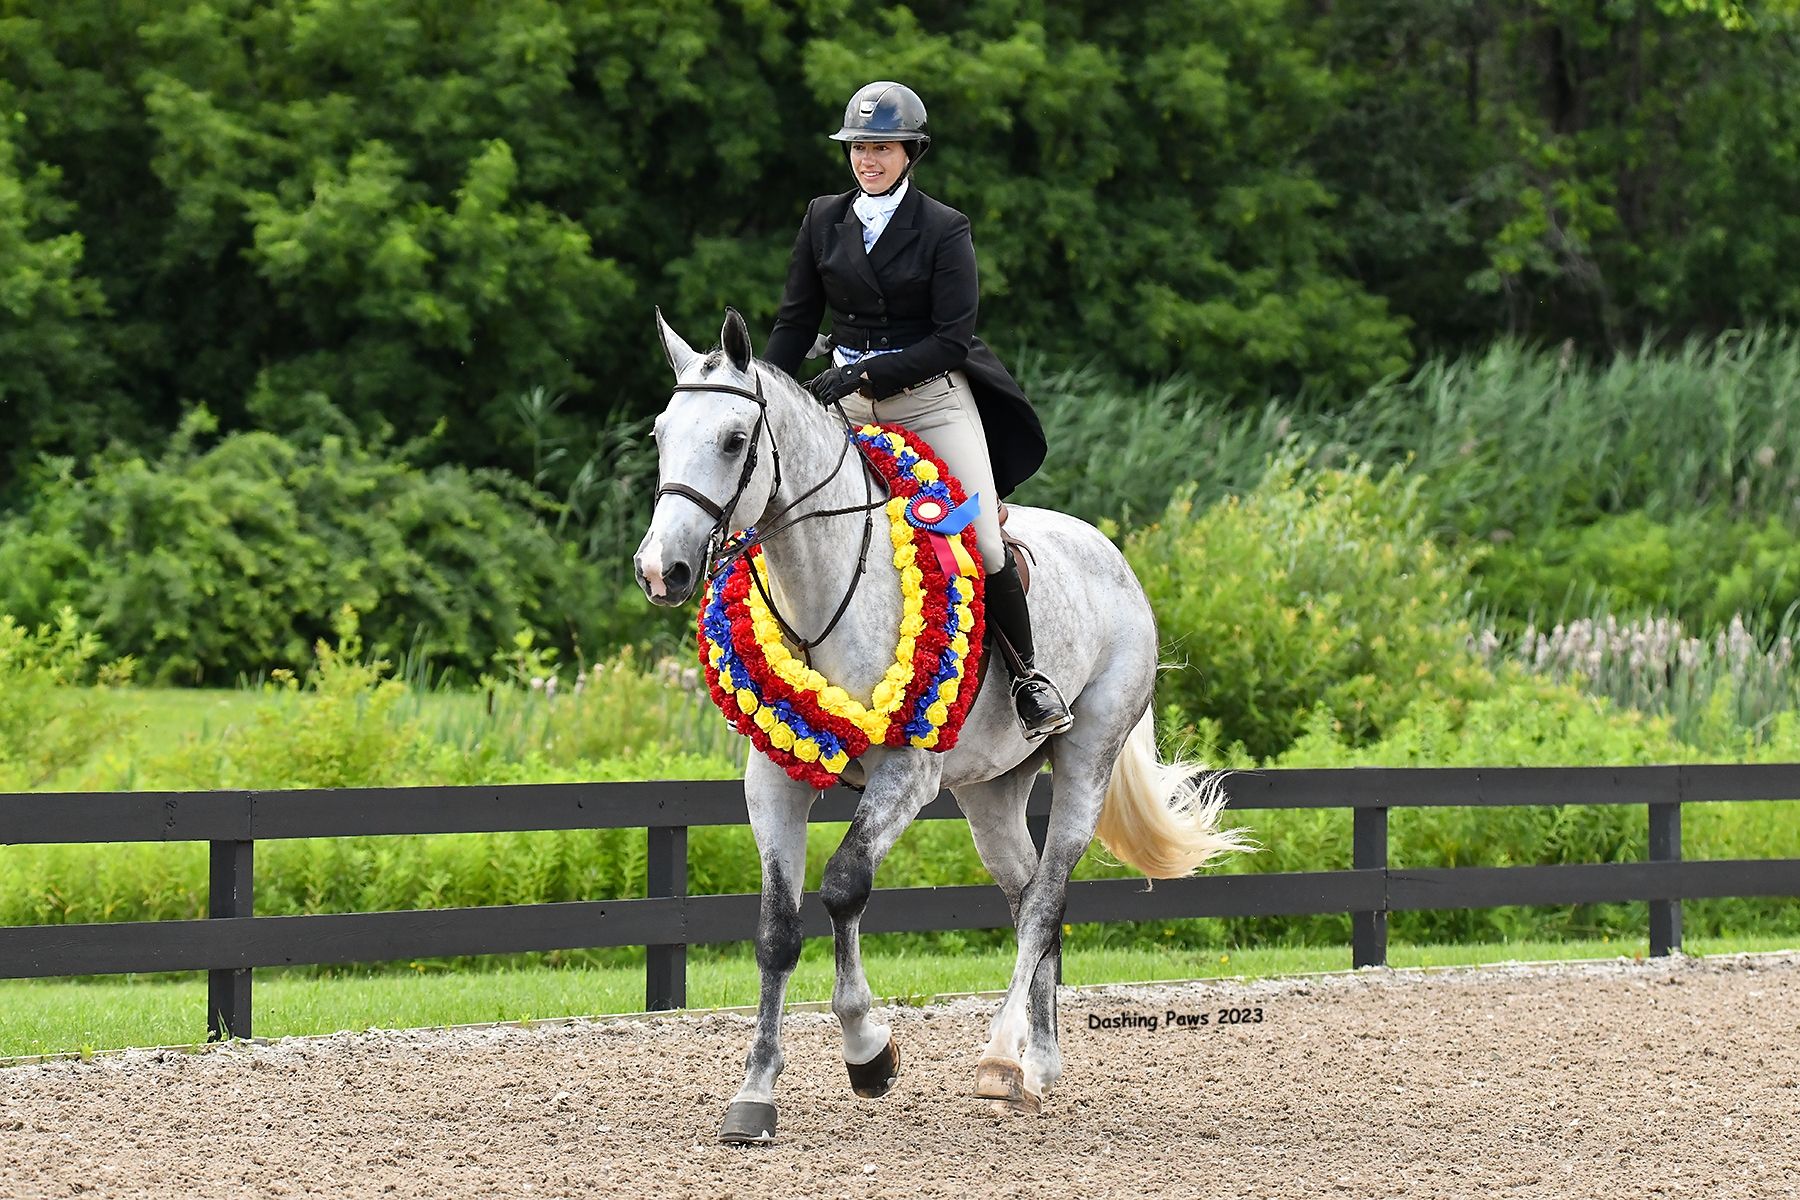 Quincy Hayes and Suit USHJA $5,000 the Derby Follow the National Top in Podium Hunter